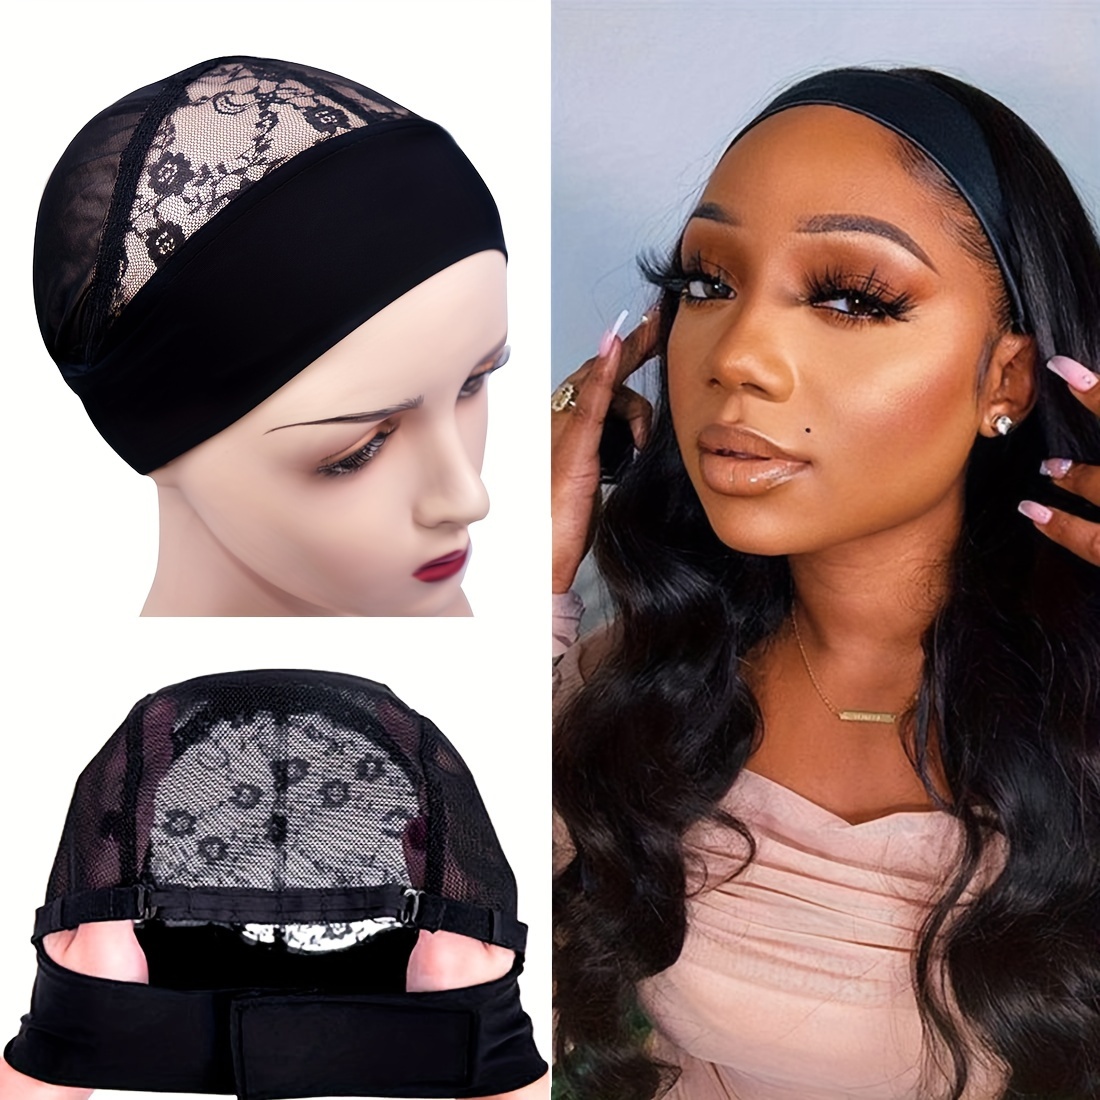 Headband Wig Cap For Making Wigs With Adjustable Straps Black One